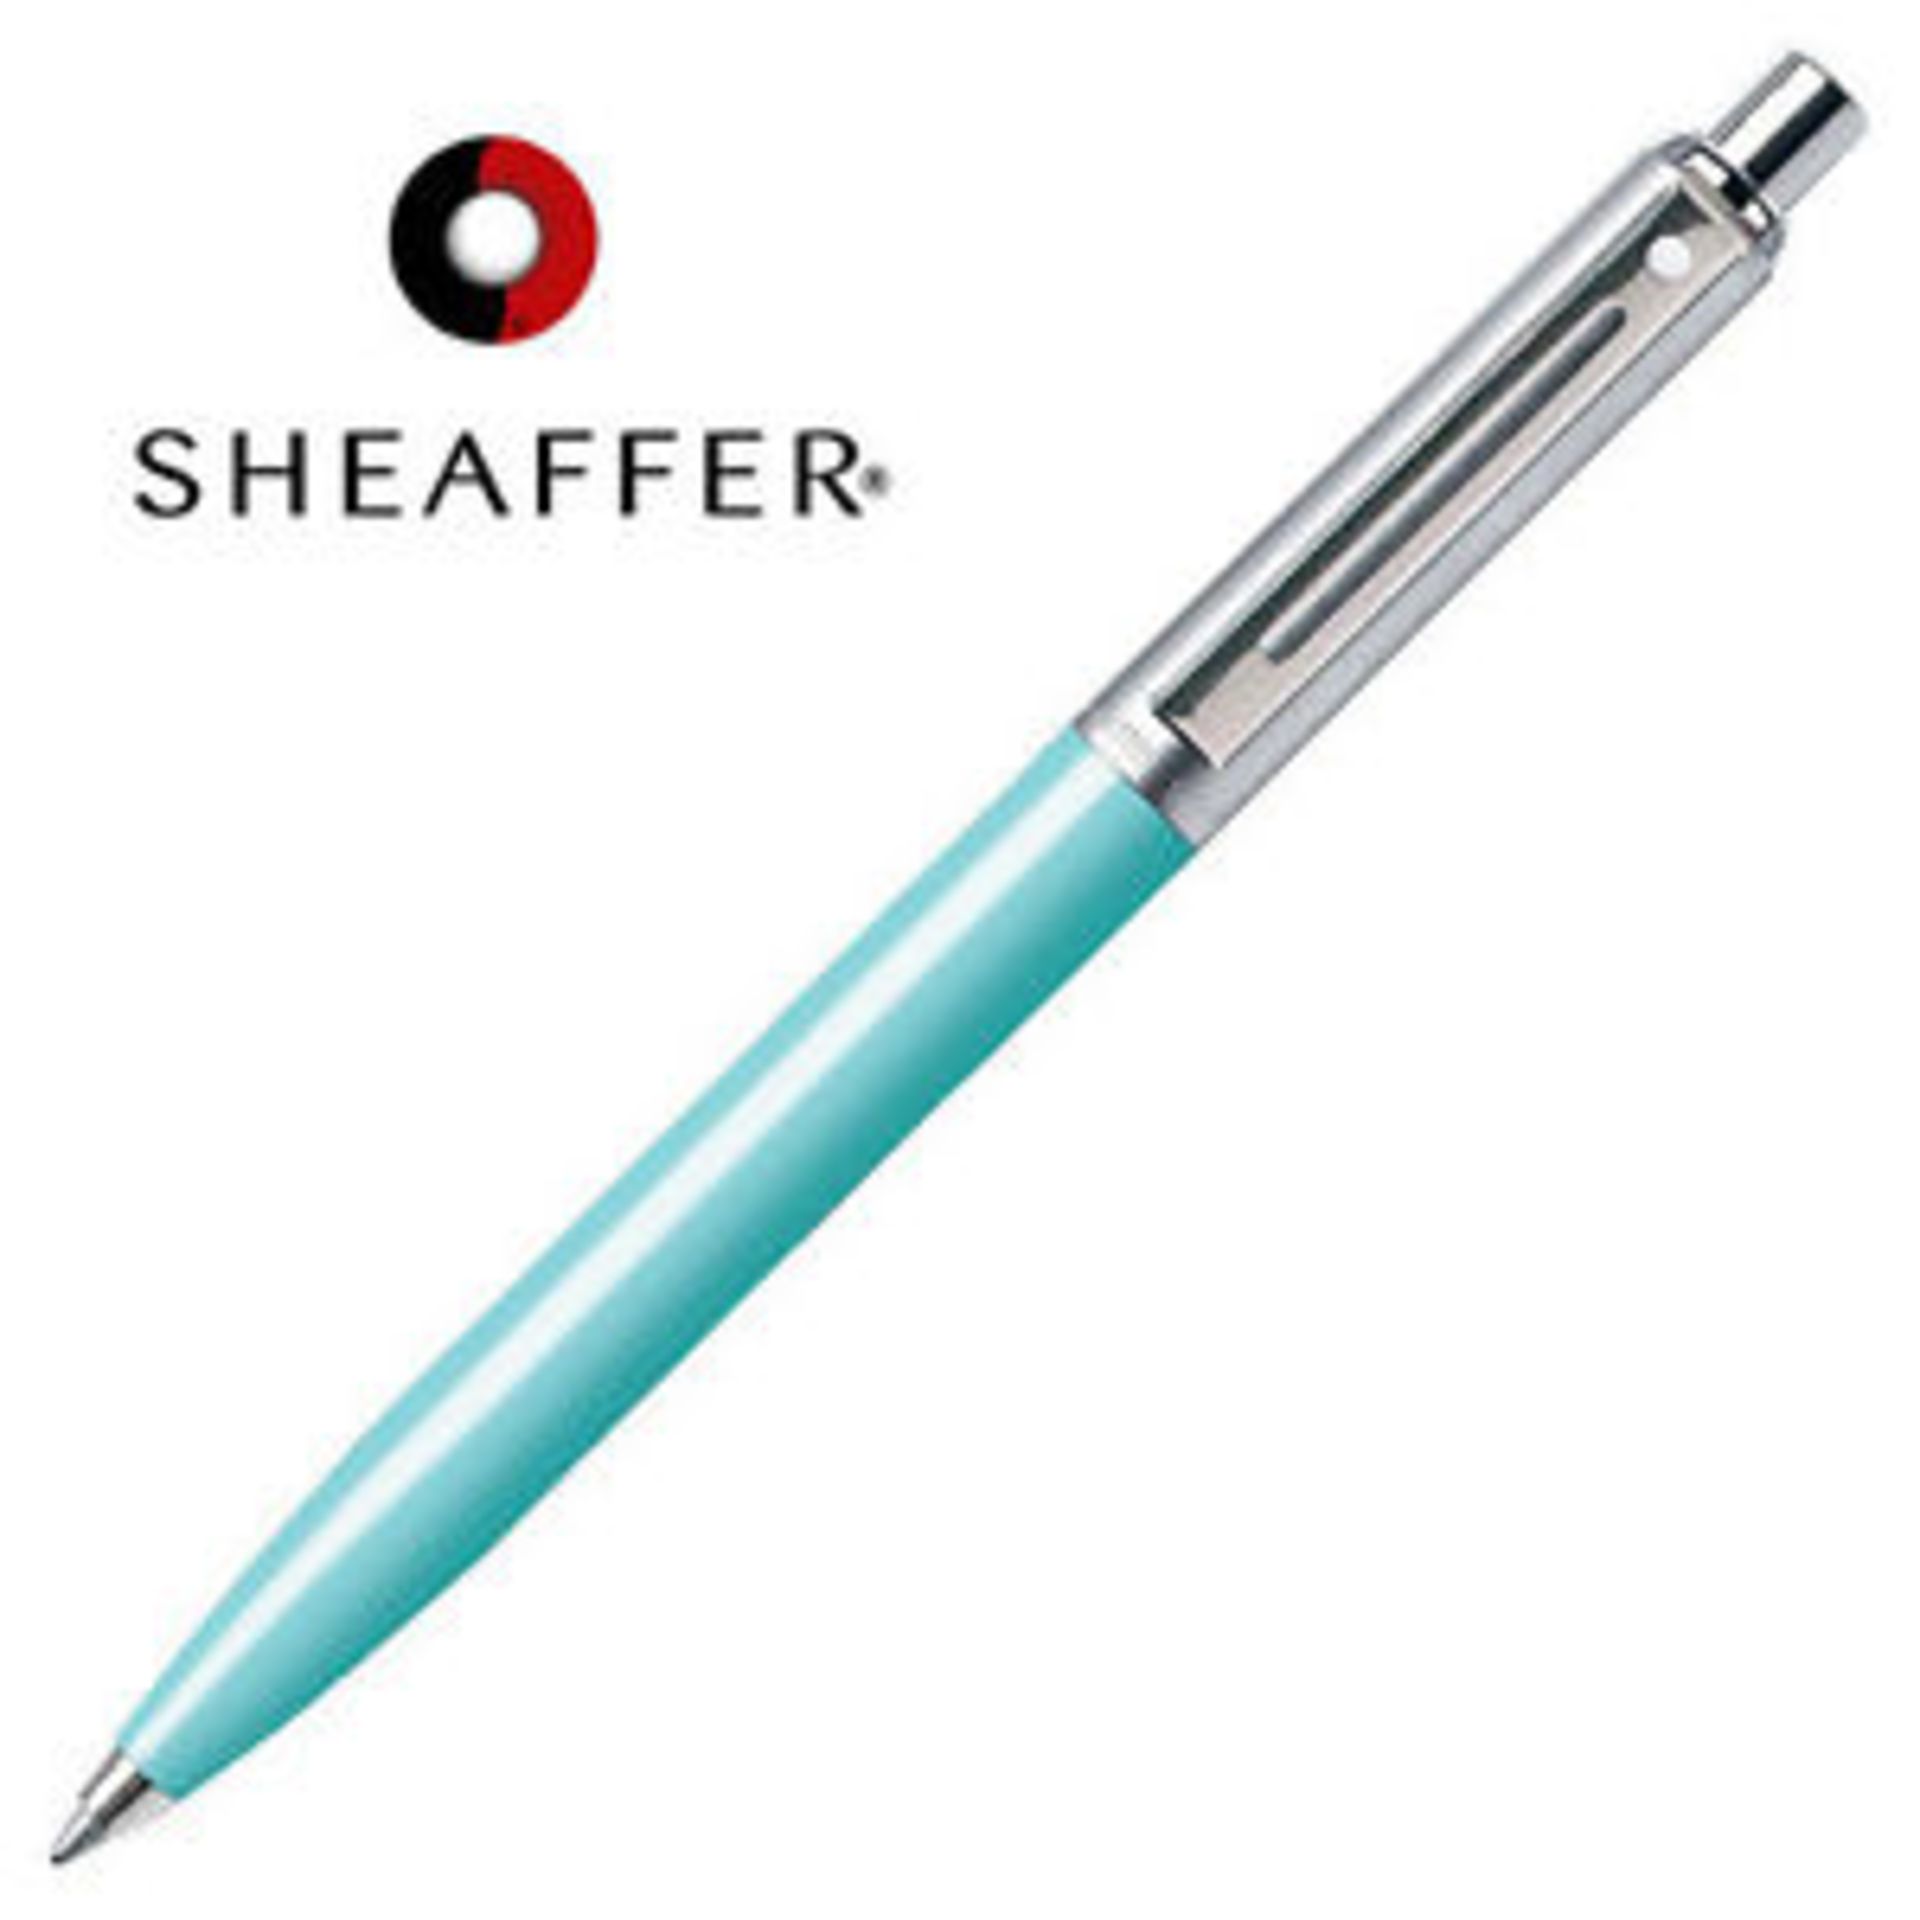 V Brand New Sheaffer Sentinel Light Blue Pencil With Brushed Chrome Cap In Case